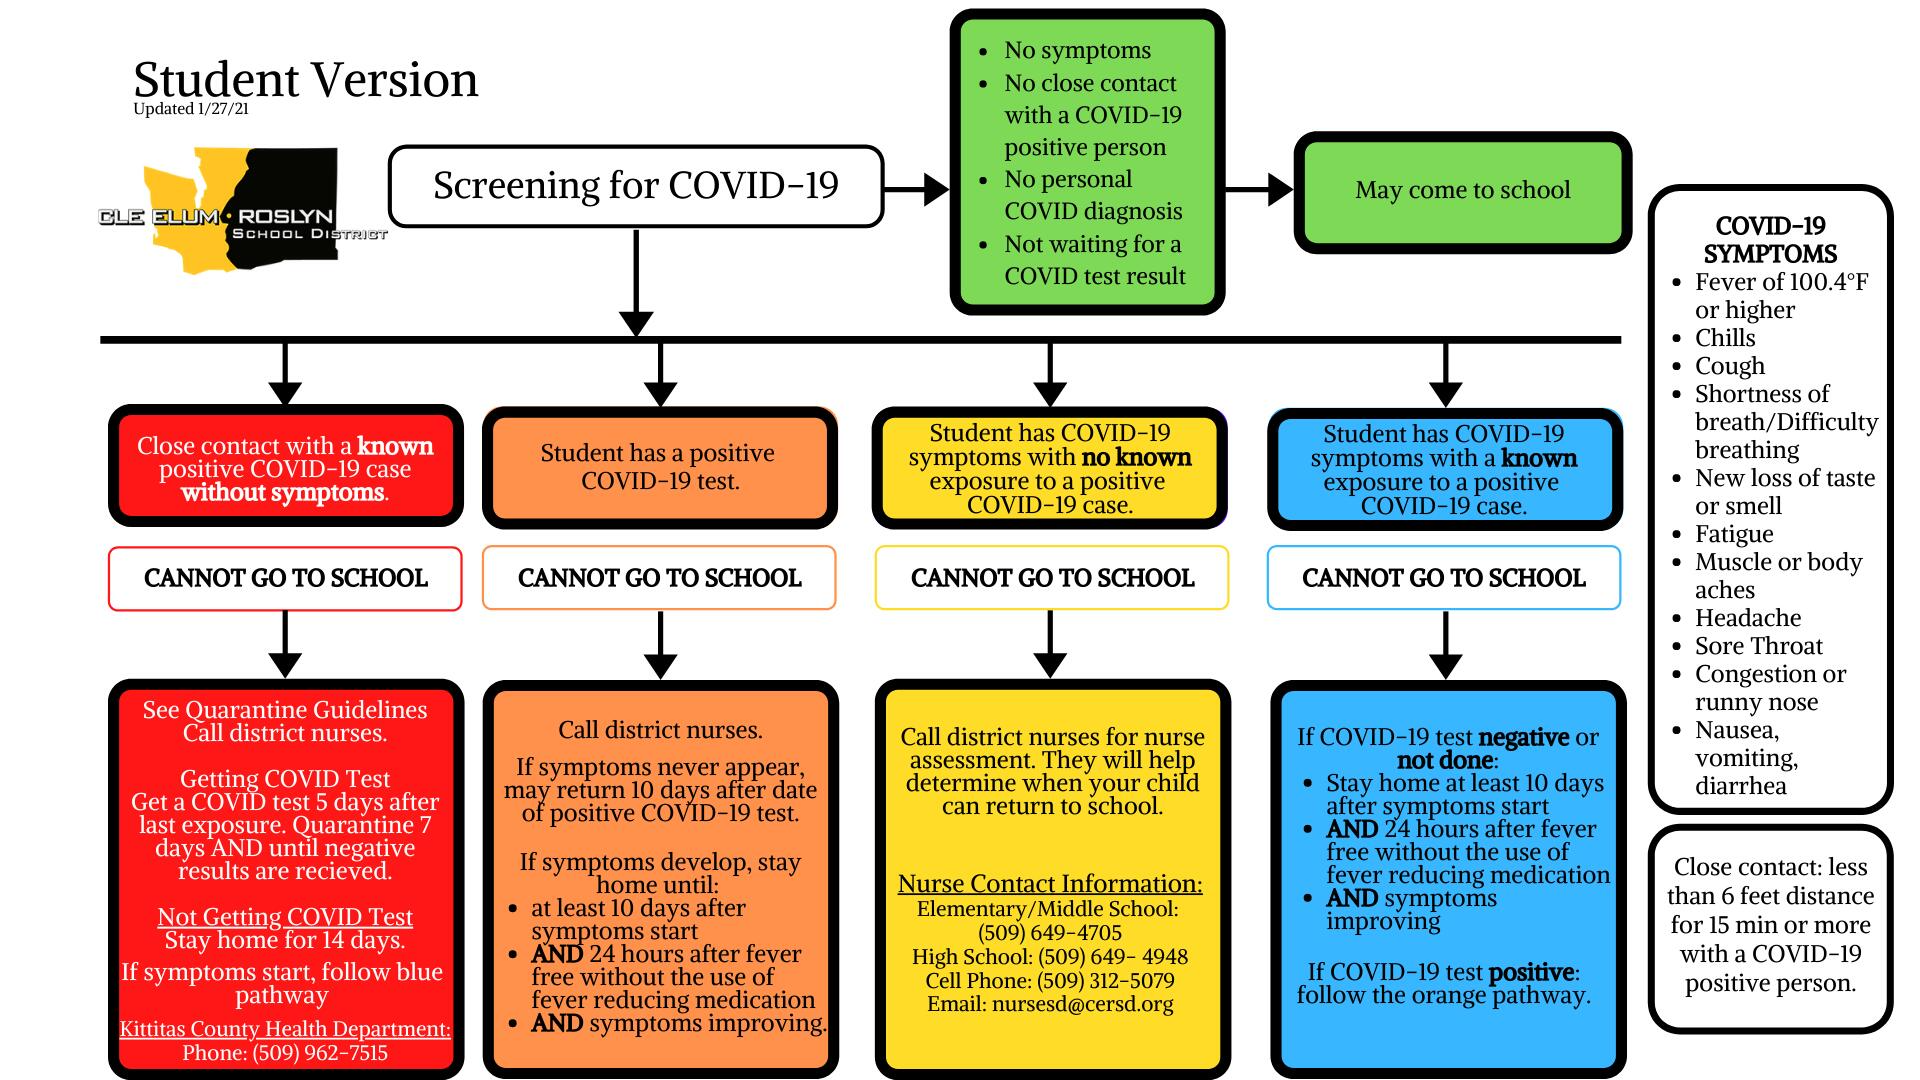 Student Version Updated 1/27/21 Screening for COVID-19 - this chart walks through what to do if you have no symptoms, close contact with a known positive case, student has had a positive test, students has COVID symptoms with no known exposure, student has symptoms with a known exposure. In most of the cases, do not go to school if you have symptoms or have been in contact with someone who has symptoms or tested positive.